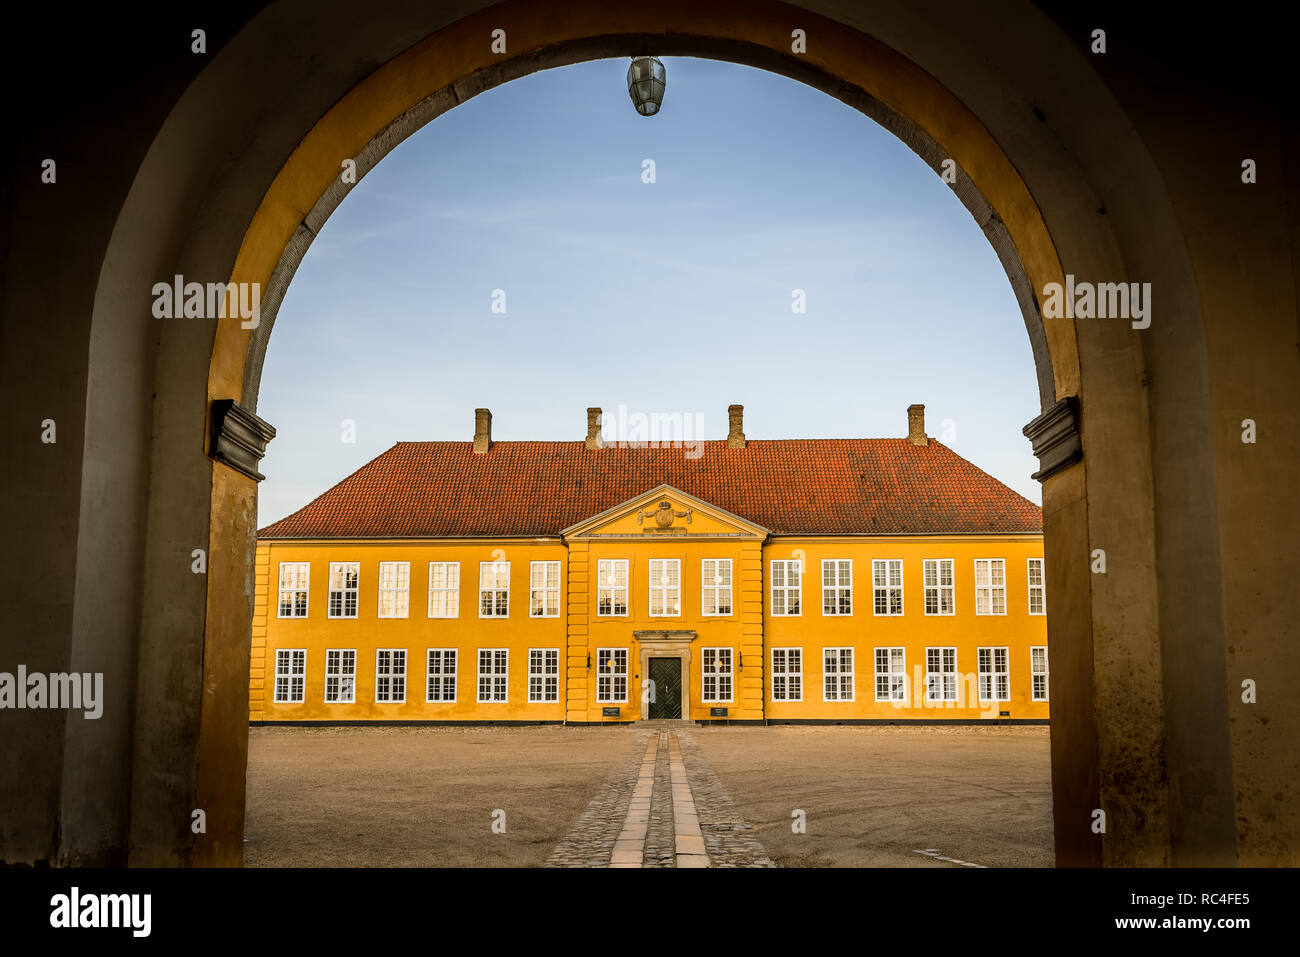 The gate to the yellow palace in Roskilde, and  the arch and a blue sky. Roskilde, Denmark, January 11, 2019 Stock Photo